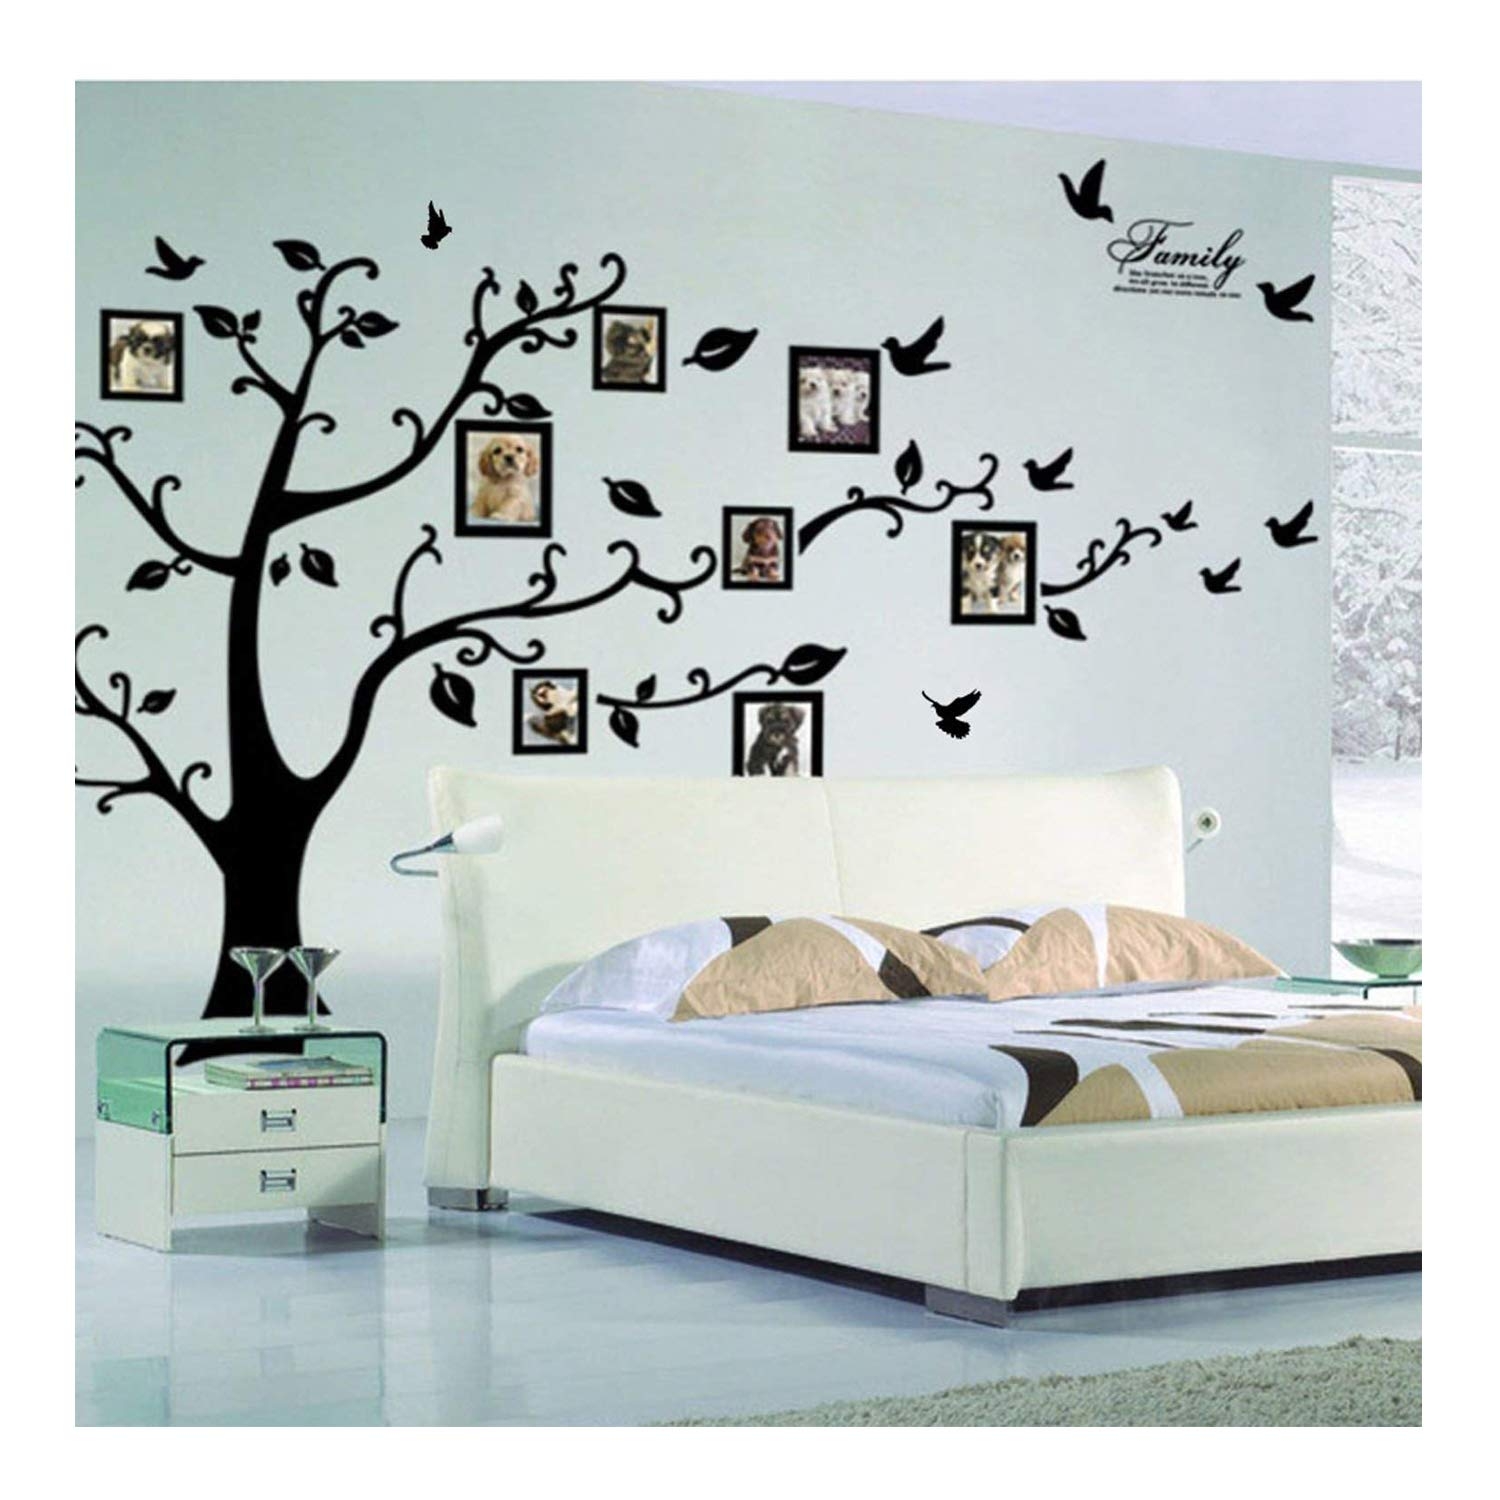 Small Family Tree Wall Decal 3D DIY Photo Frame Wall Stickers Mural Home Decor